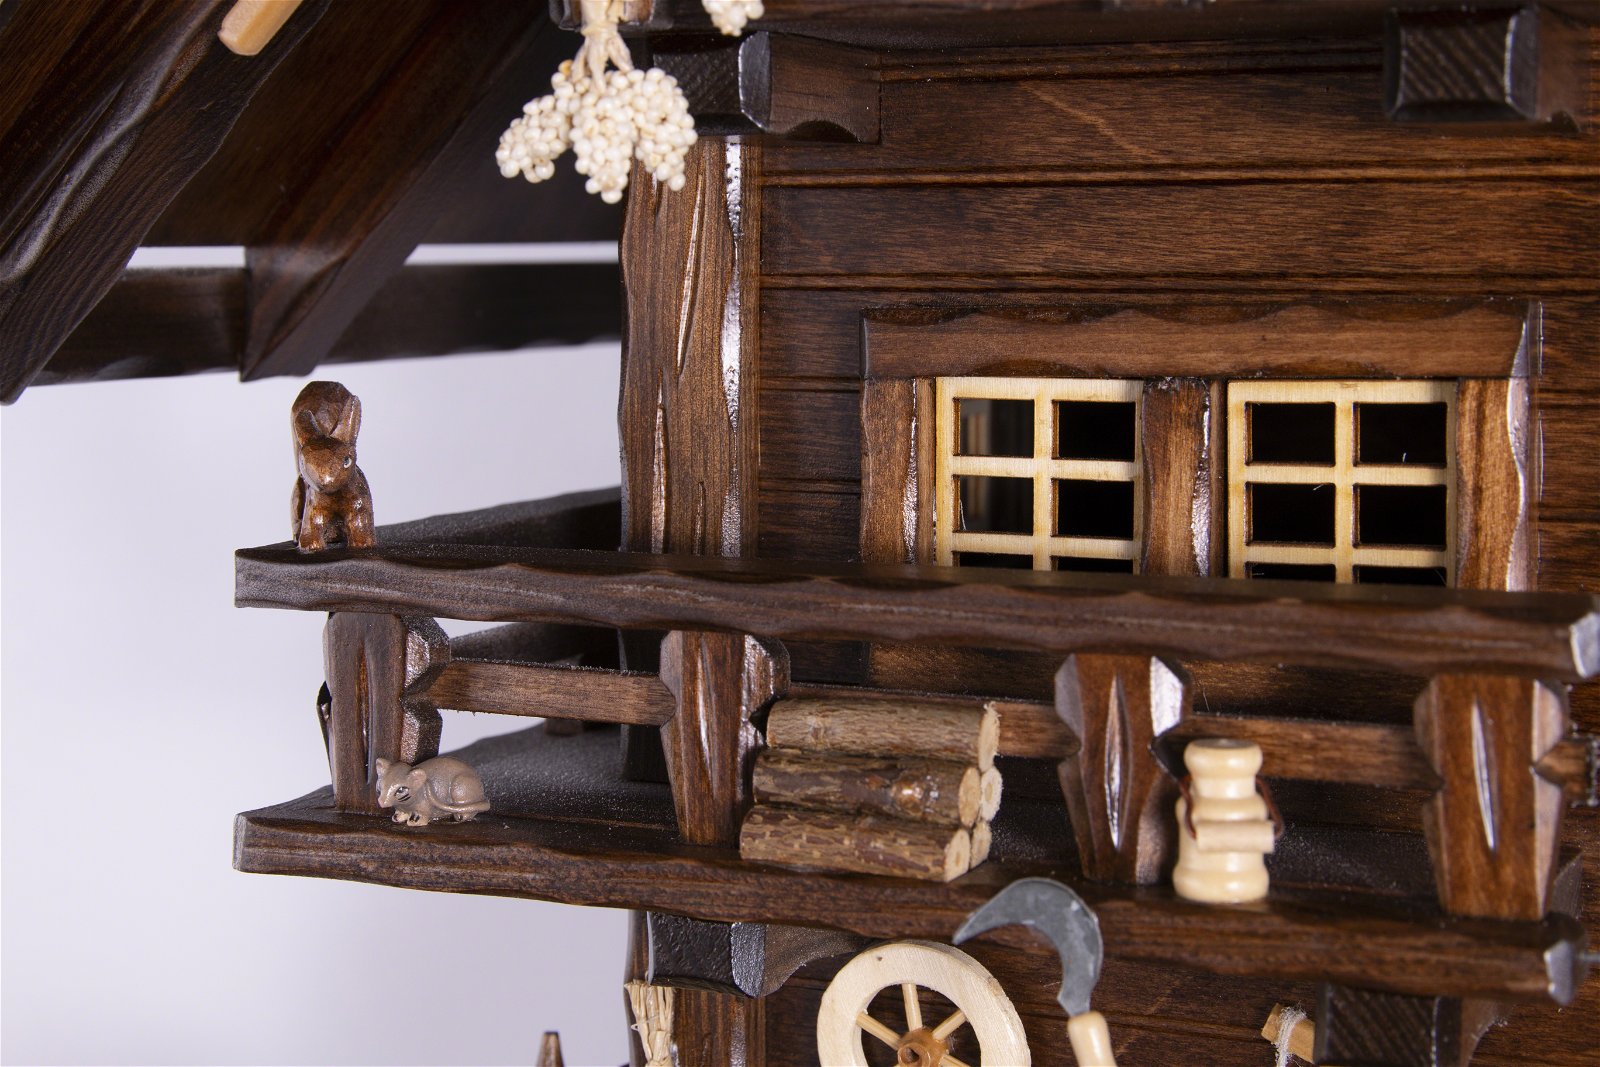 Cuckoo Clock 8-day-movement Chalet-Style 160cm by August Schwer